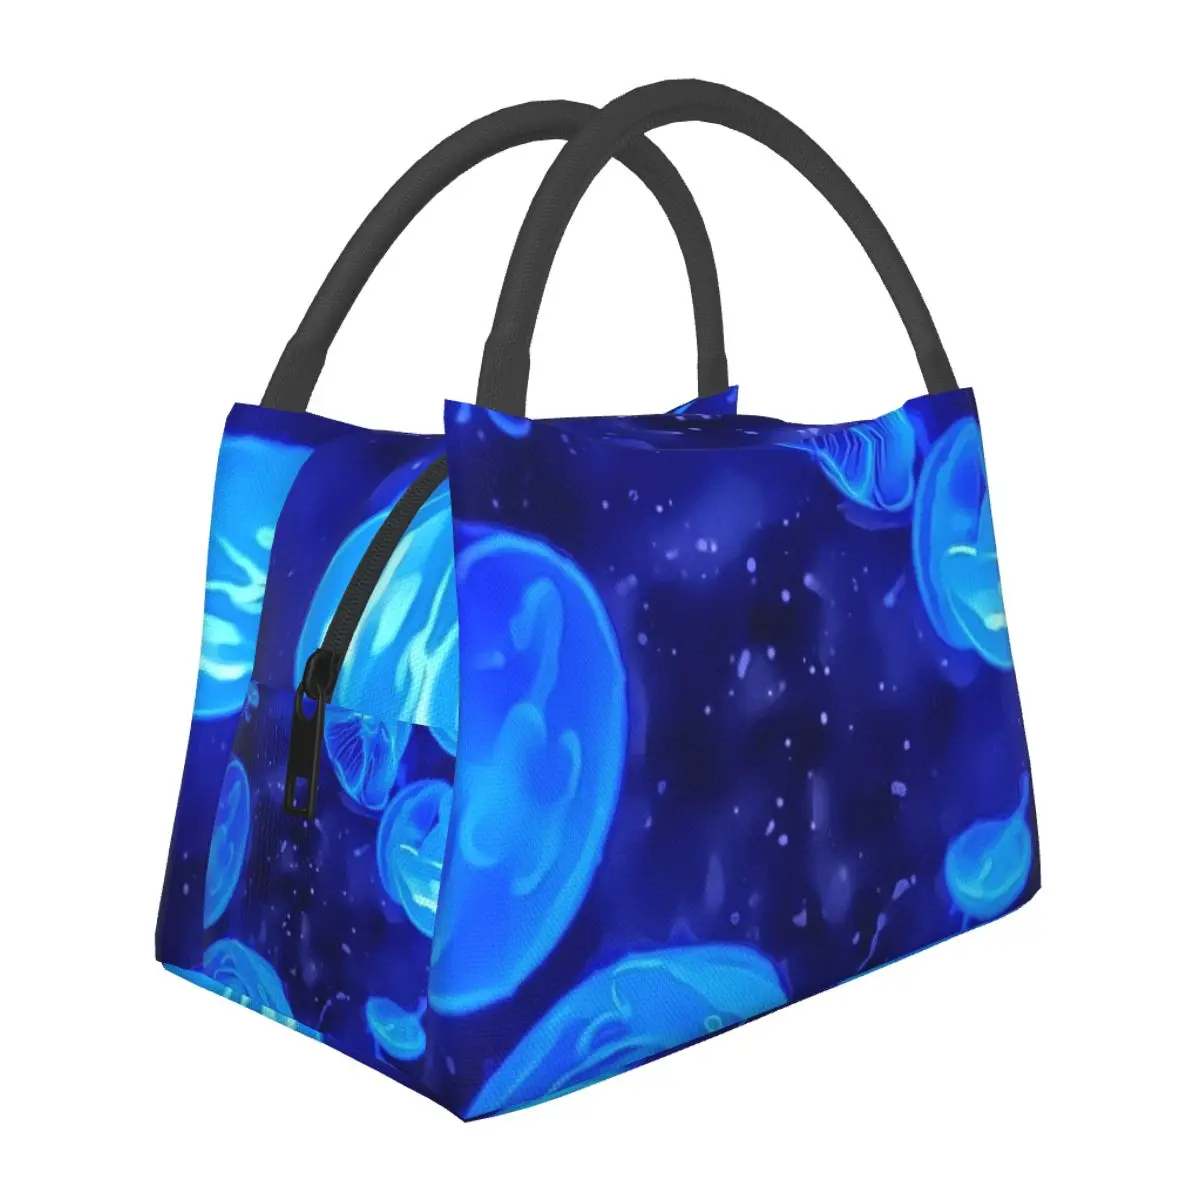 

Tropical Marine Print Lunch Bag Blue Jelly Fish Fun Lunch Box For Unisex Office Portable Cooler Bag Print Thermal Tote Handbags